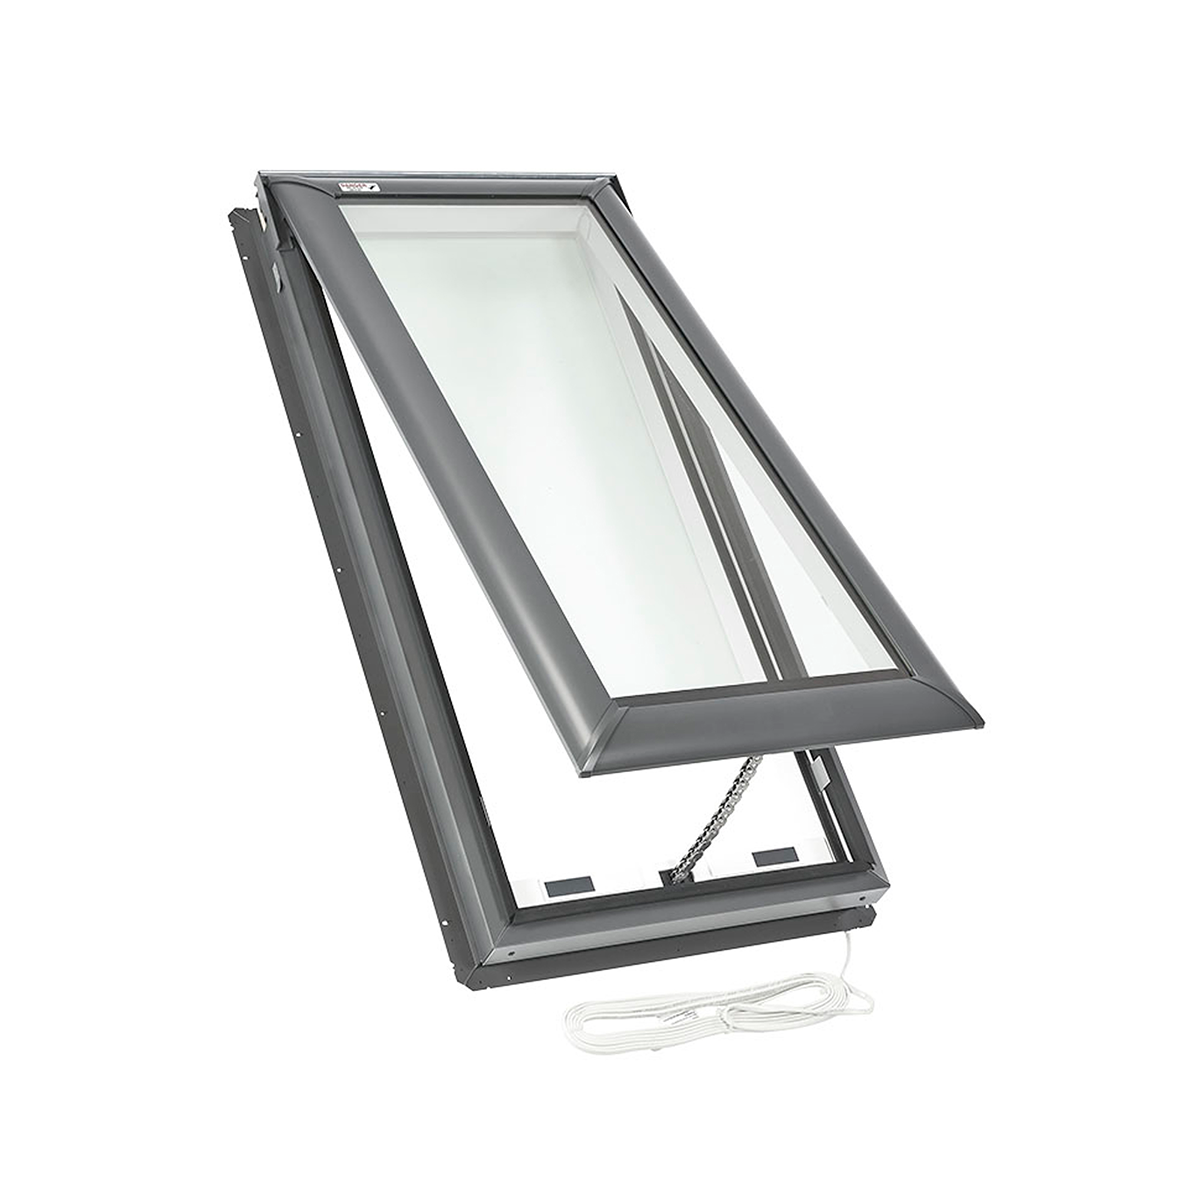 Electric Deck-Mount Skylight with Laminated Low-E3 Glass - 21 in. x 45-3/4 in. - VSE C06